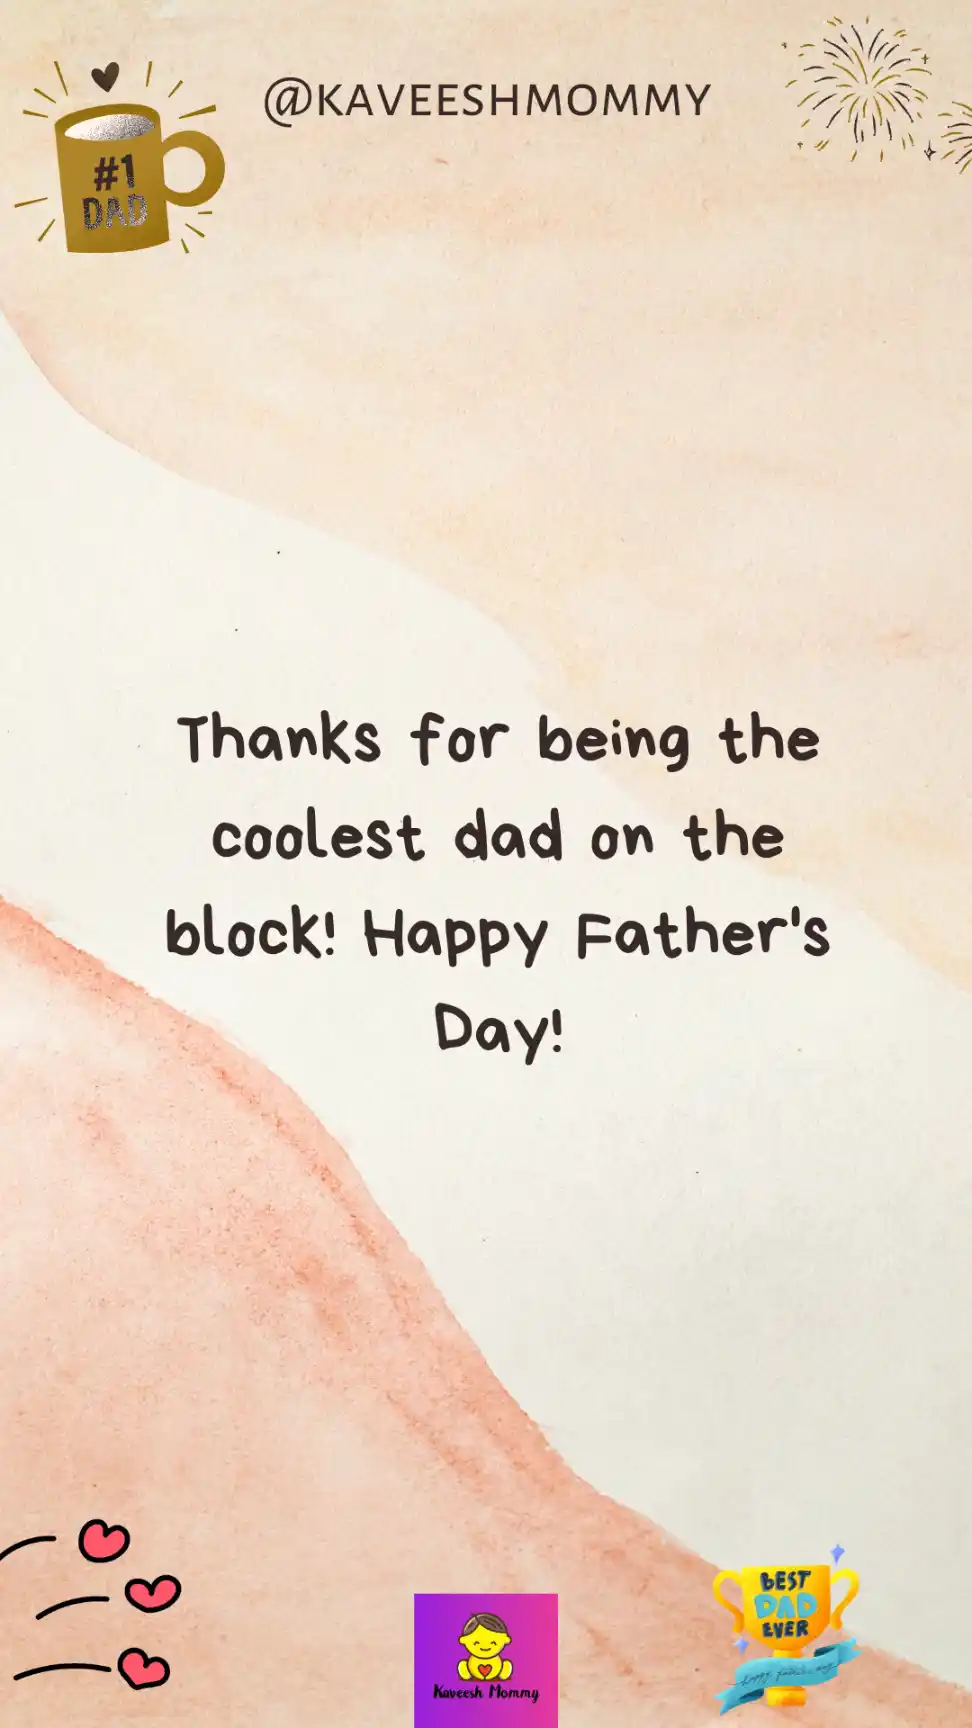 daughter happy fathers day wishes-Thanks for being the coolest dad on the block! Happy Father's Day